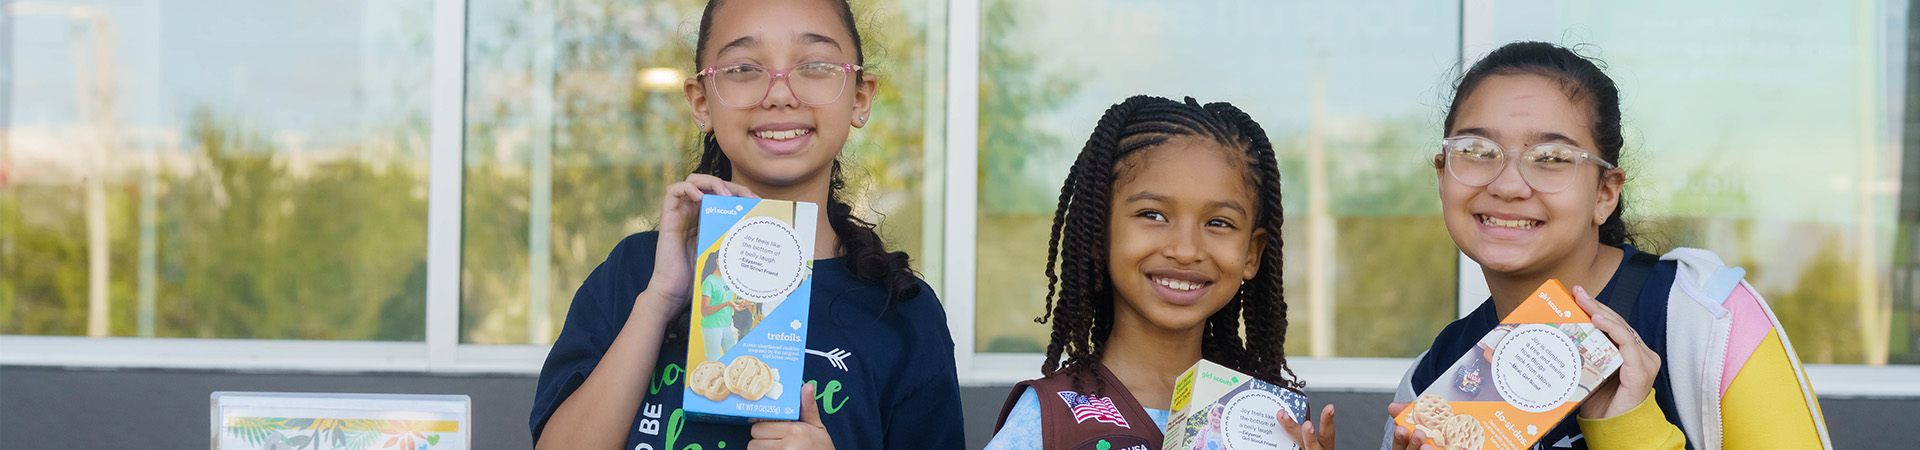  Two girl scouts holding up girl scout cookies 